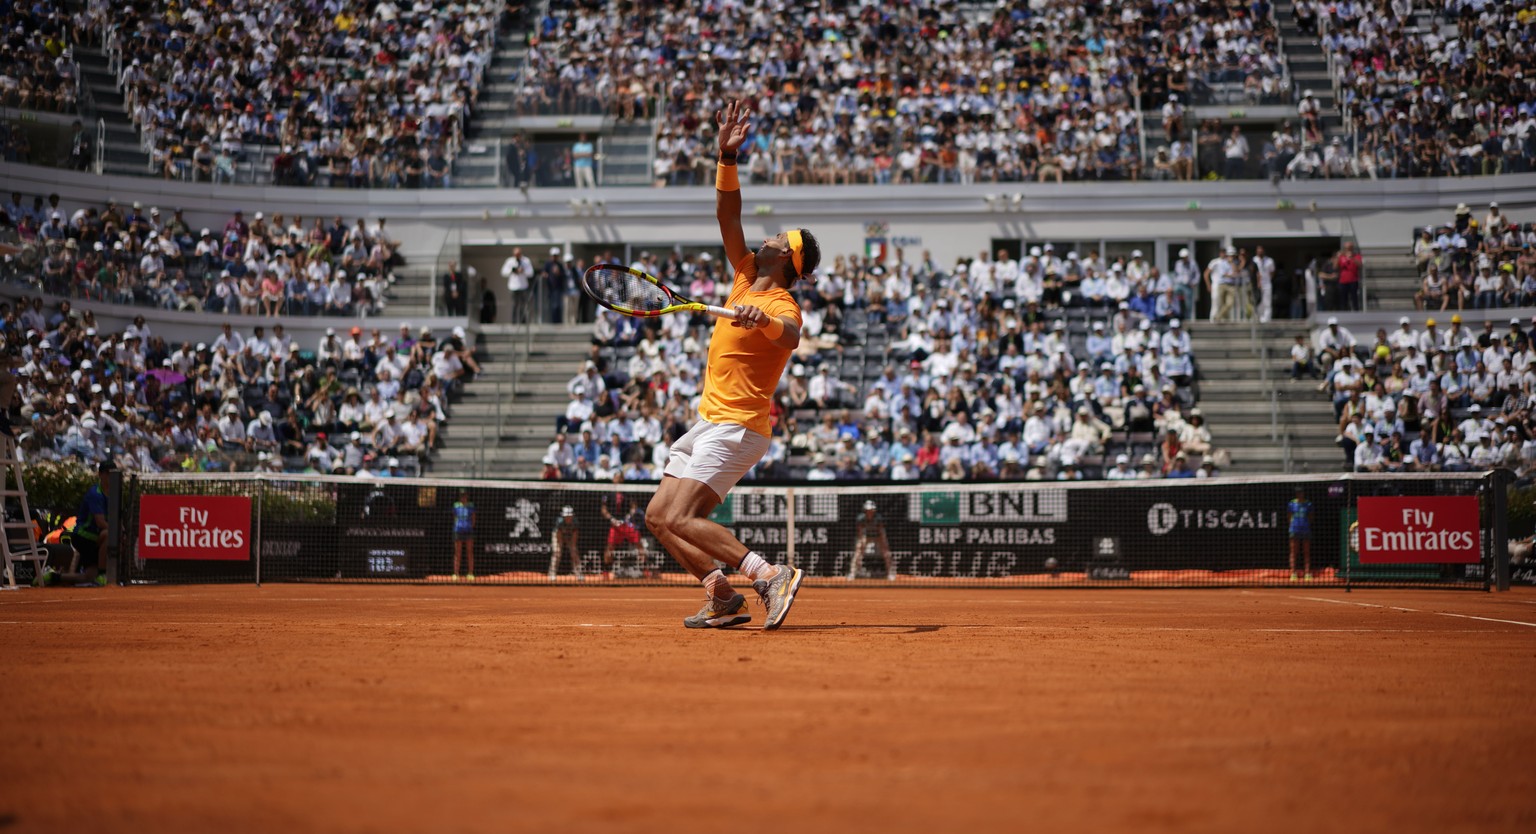 Spain&#039;s Rafael Nadal serves the ball to Italy&#039;s Fabio Fognini during a quarter final match at the Italian Open tennis tournament in Rome, Friday, May 18, 2018. Nadal won 4-6, 6-1, 6-2. (AP P ...